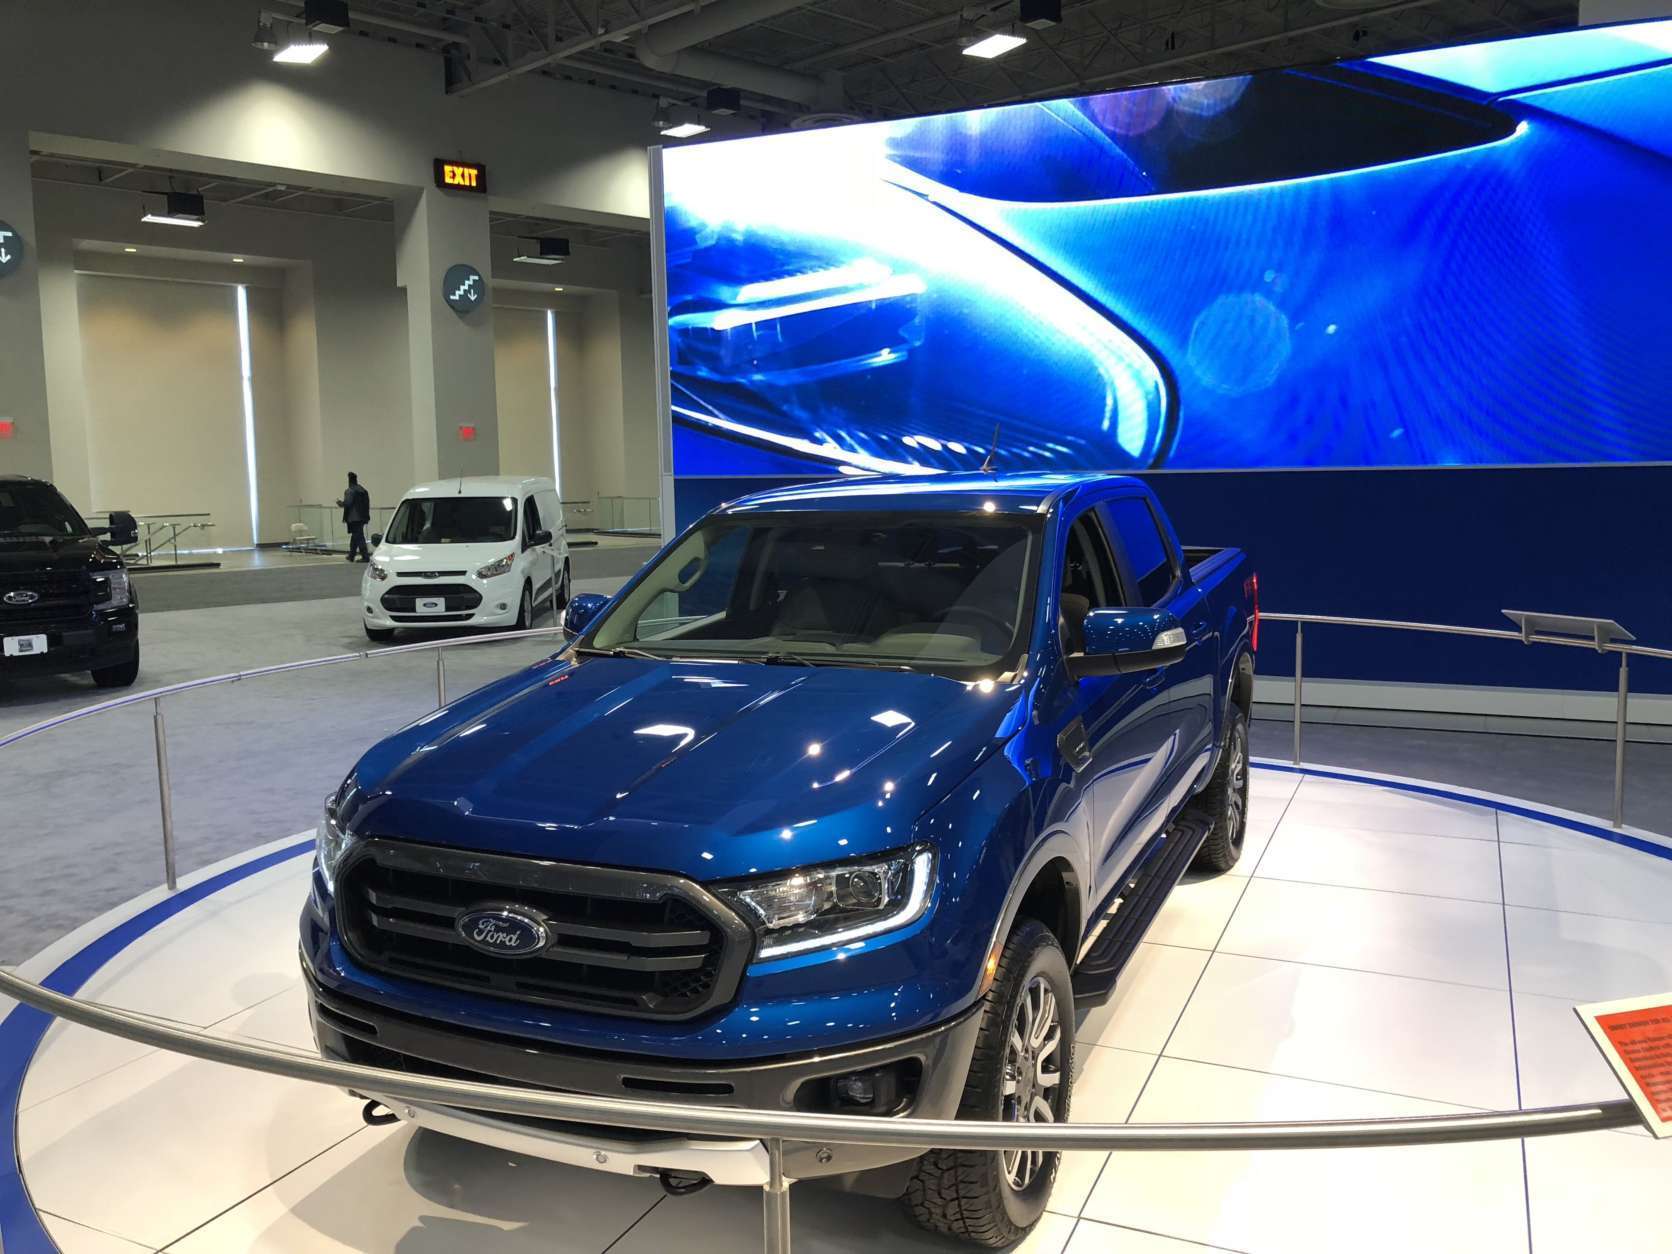 2019 Ford Ranger (WTOP/Mike Parris)